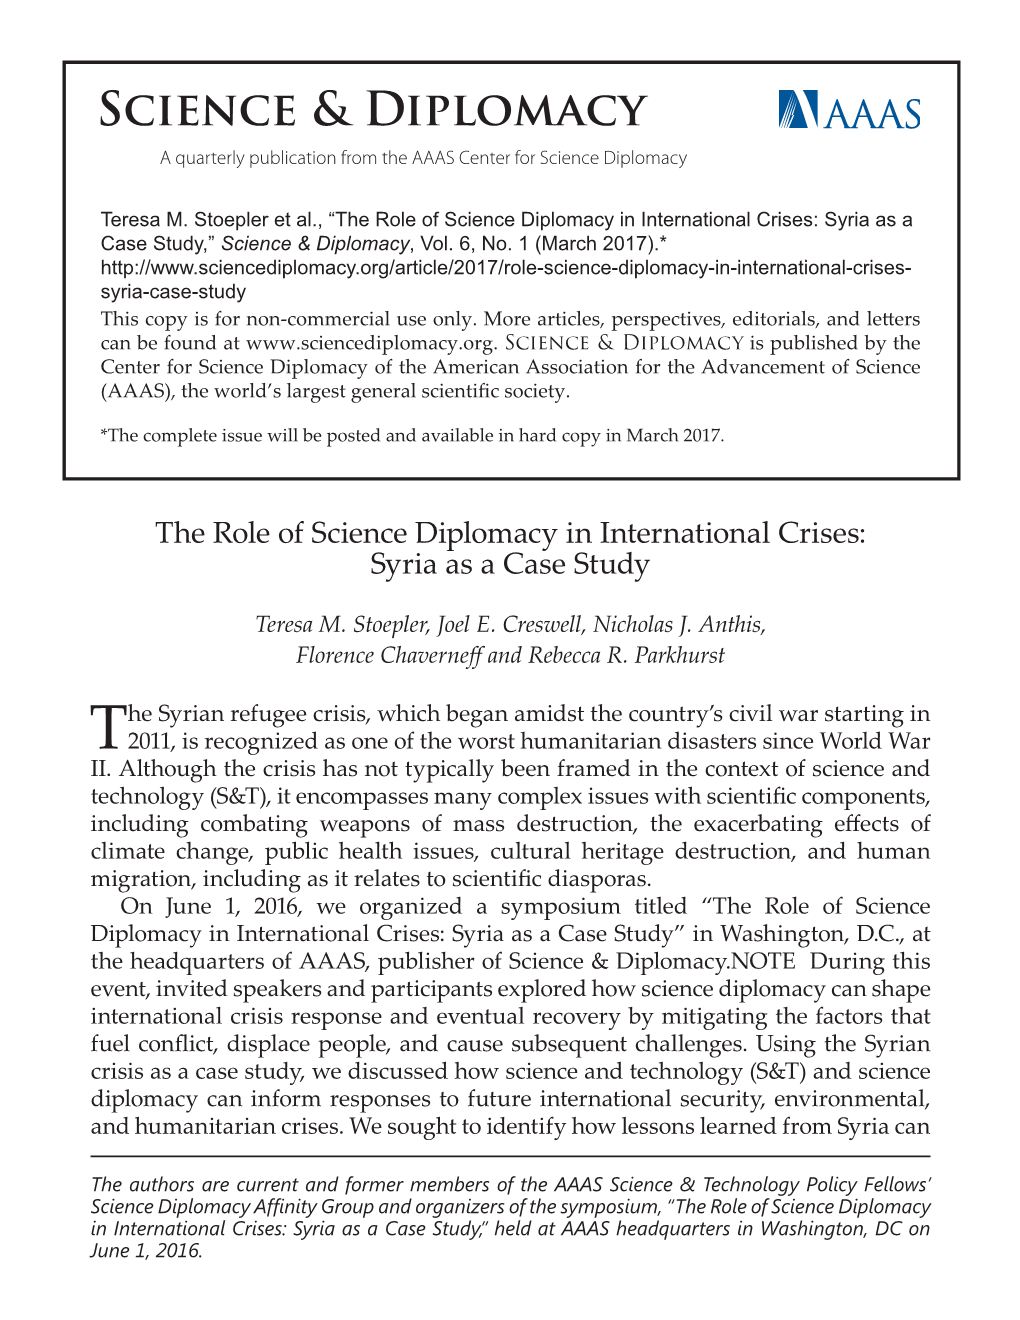 The Role of Science Diplomacy in International Crises: Syria As a Case Study,” Science & Diplomacy, Vol